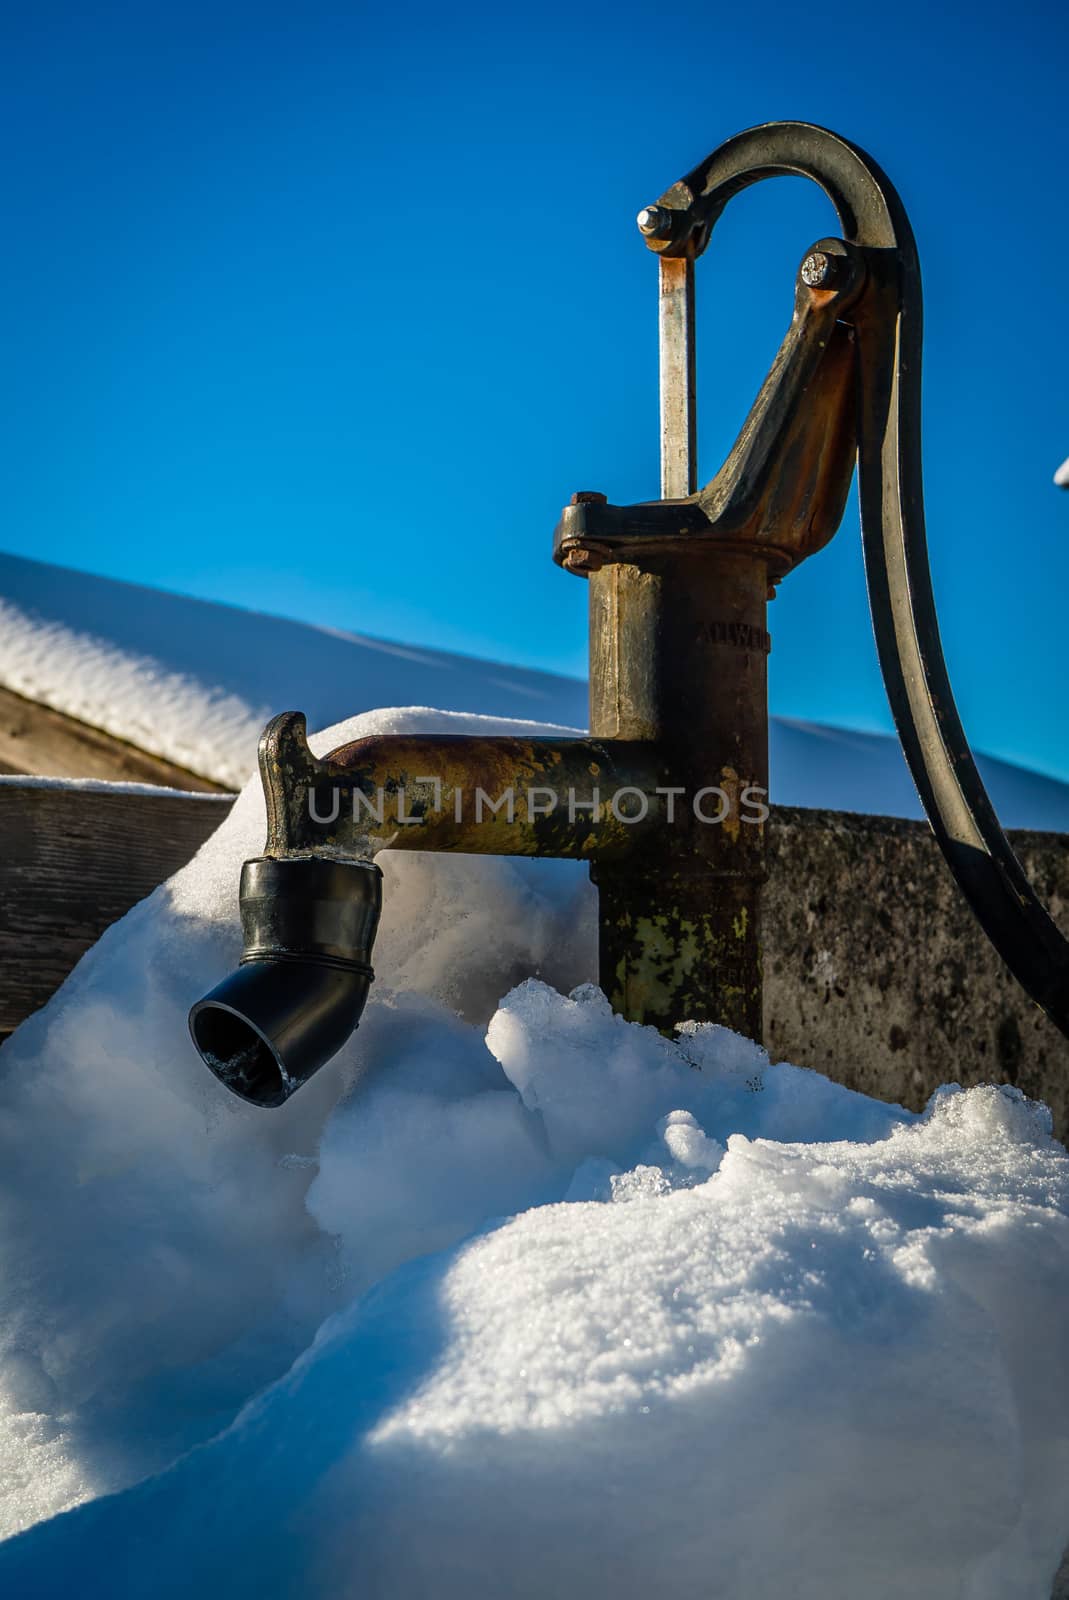 Fountain pump under the snow with a bright blue sky in winter